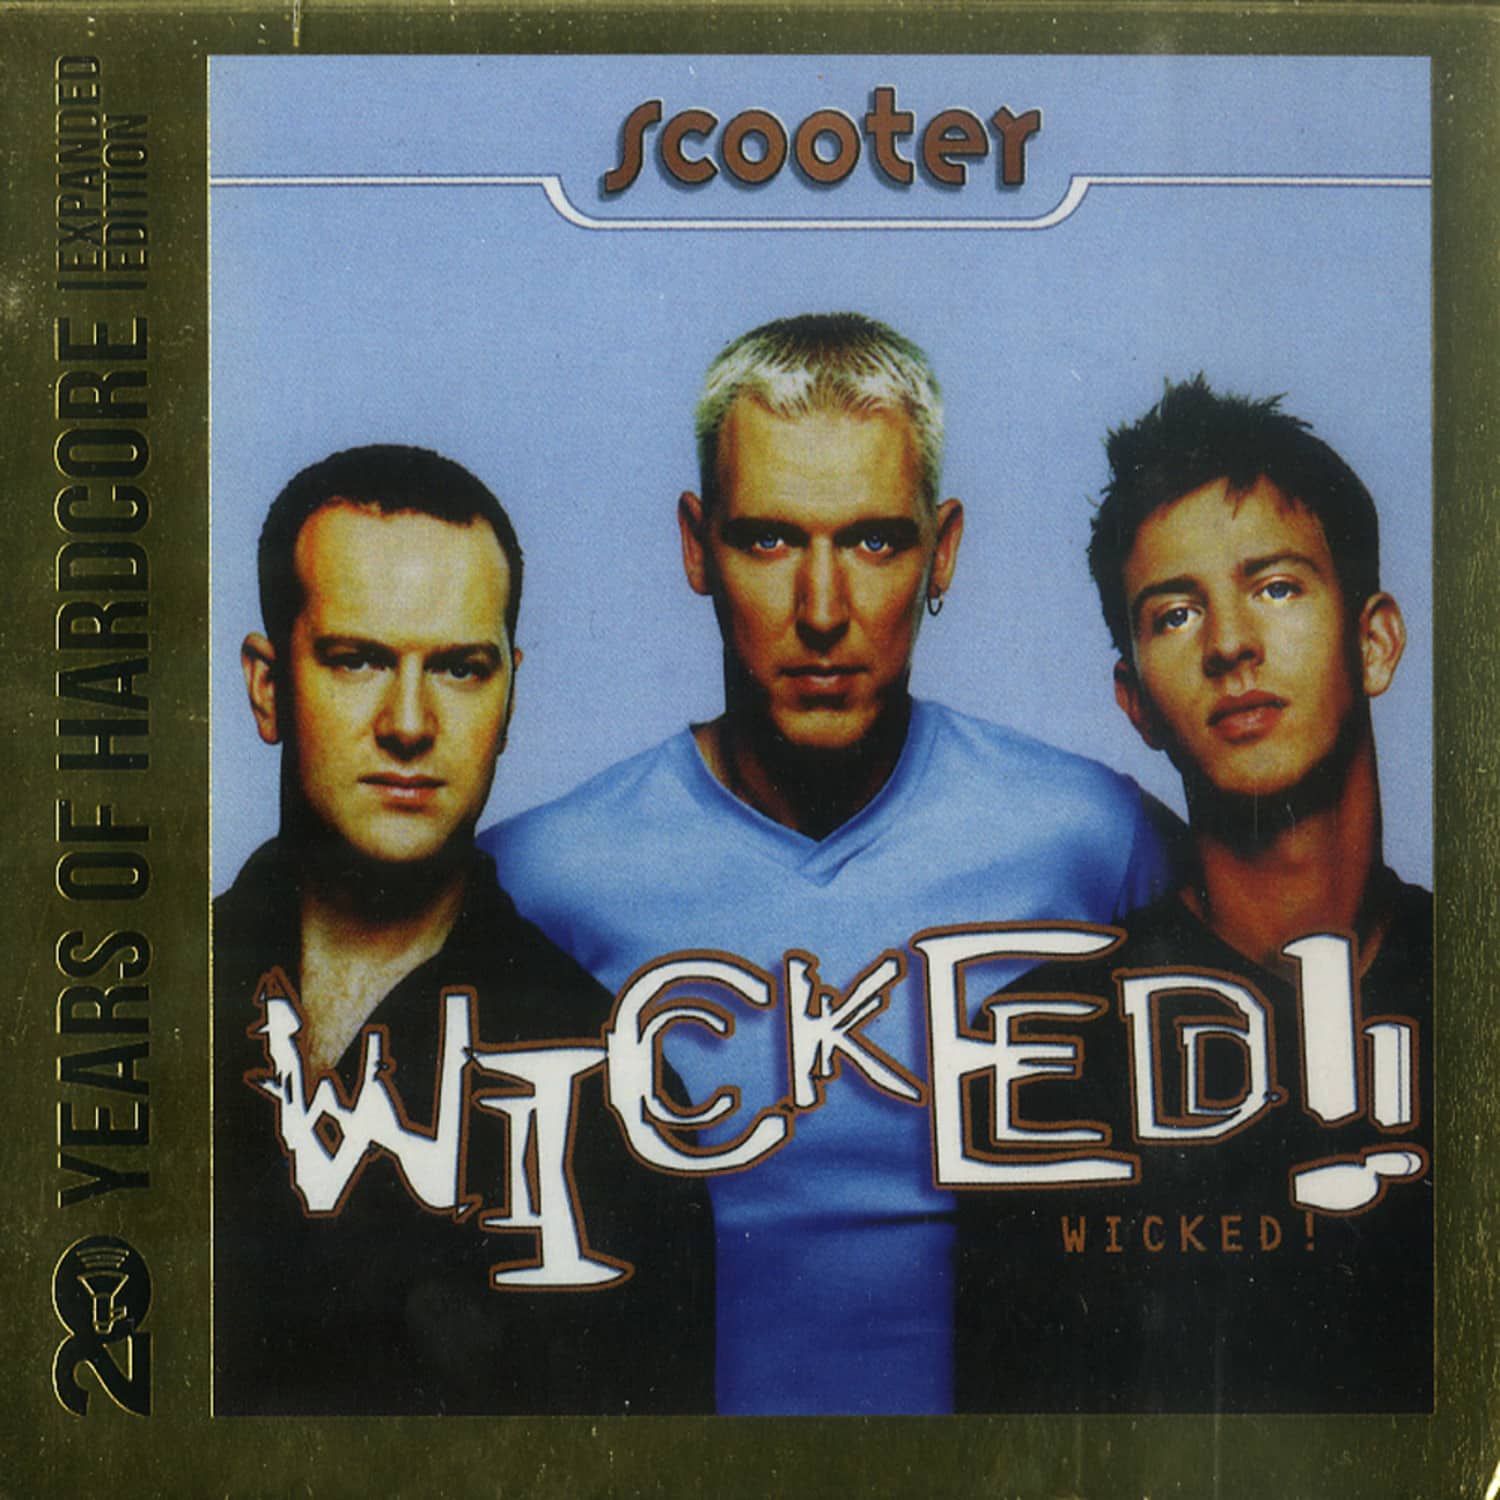 Scooter - 20 YEARS OF HARDCORE-WICKED! 